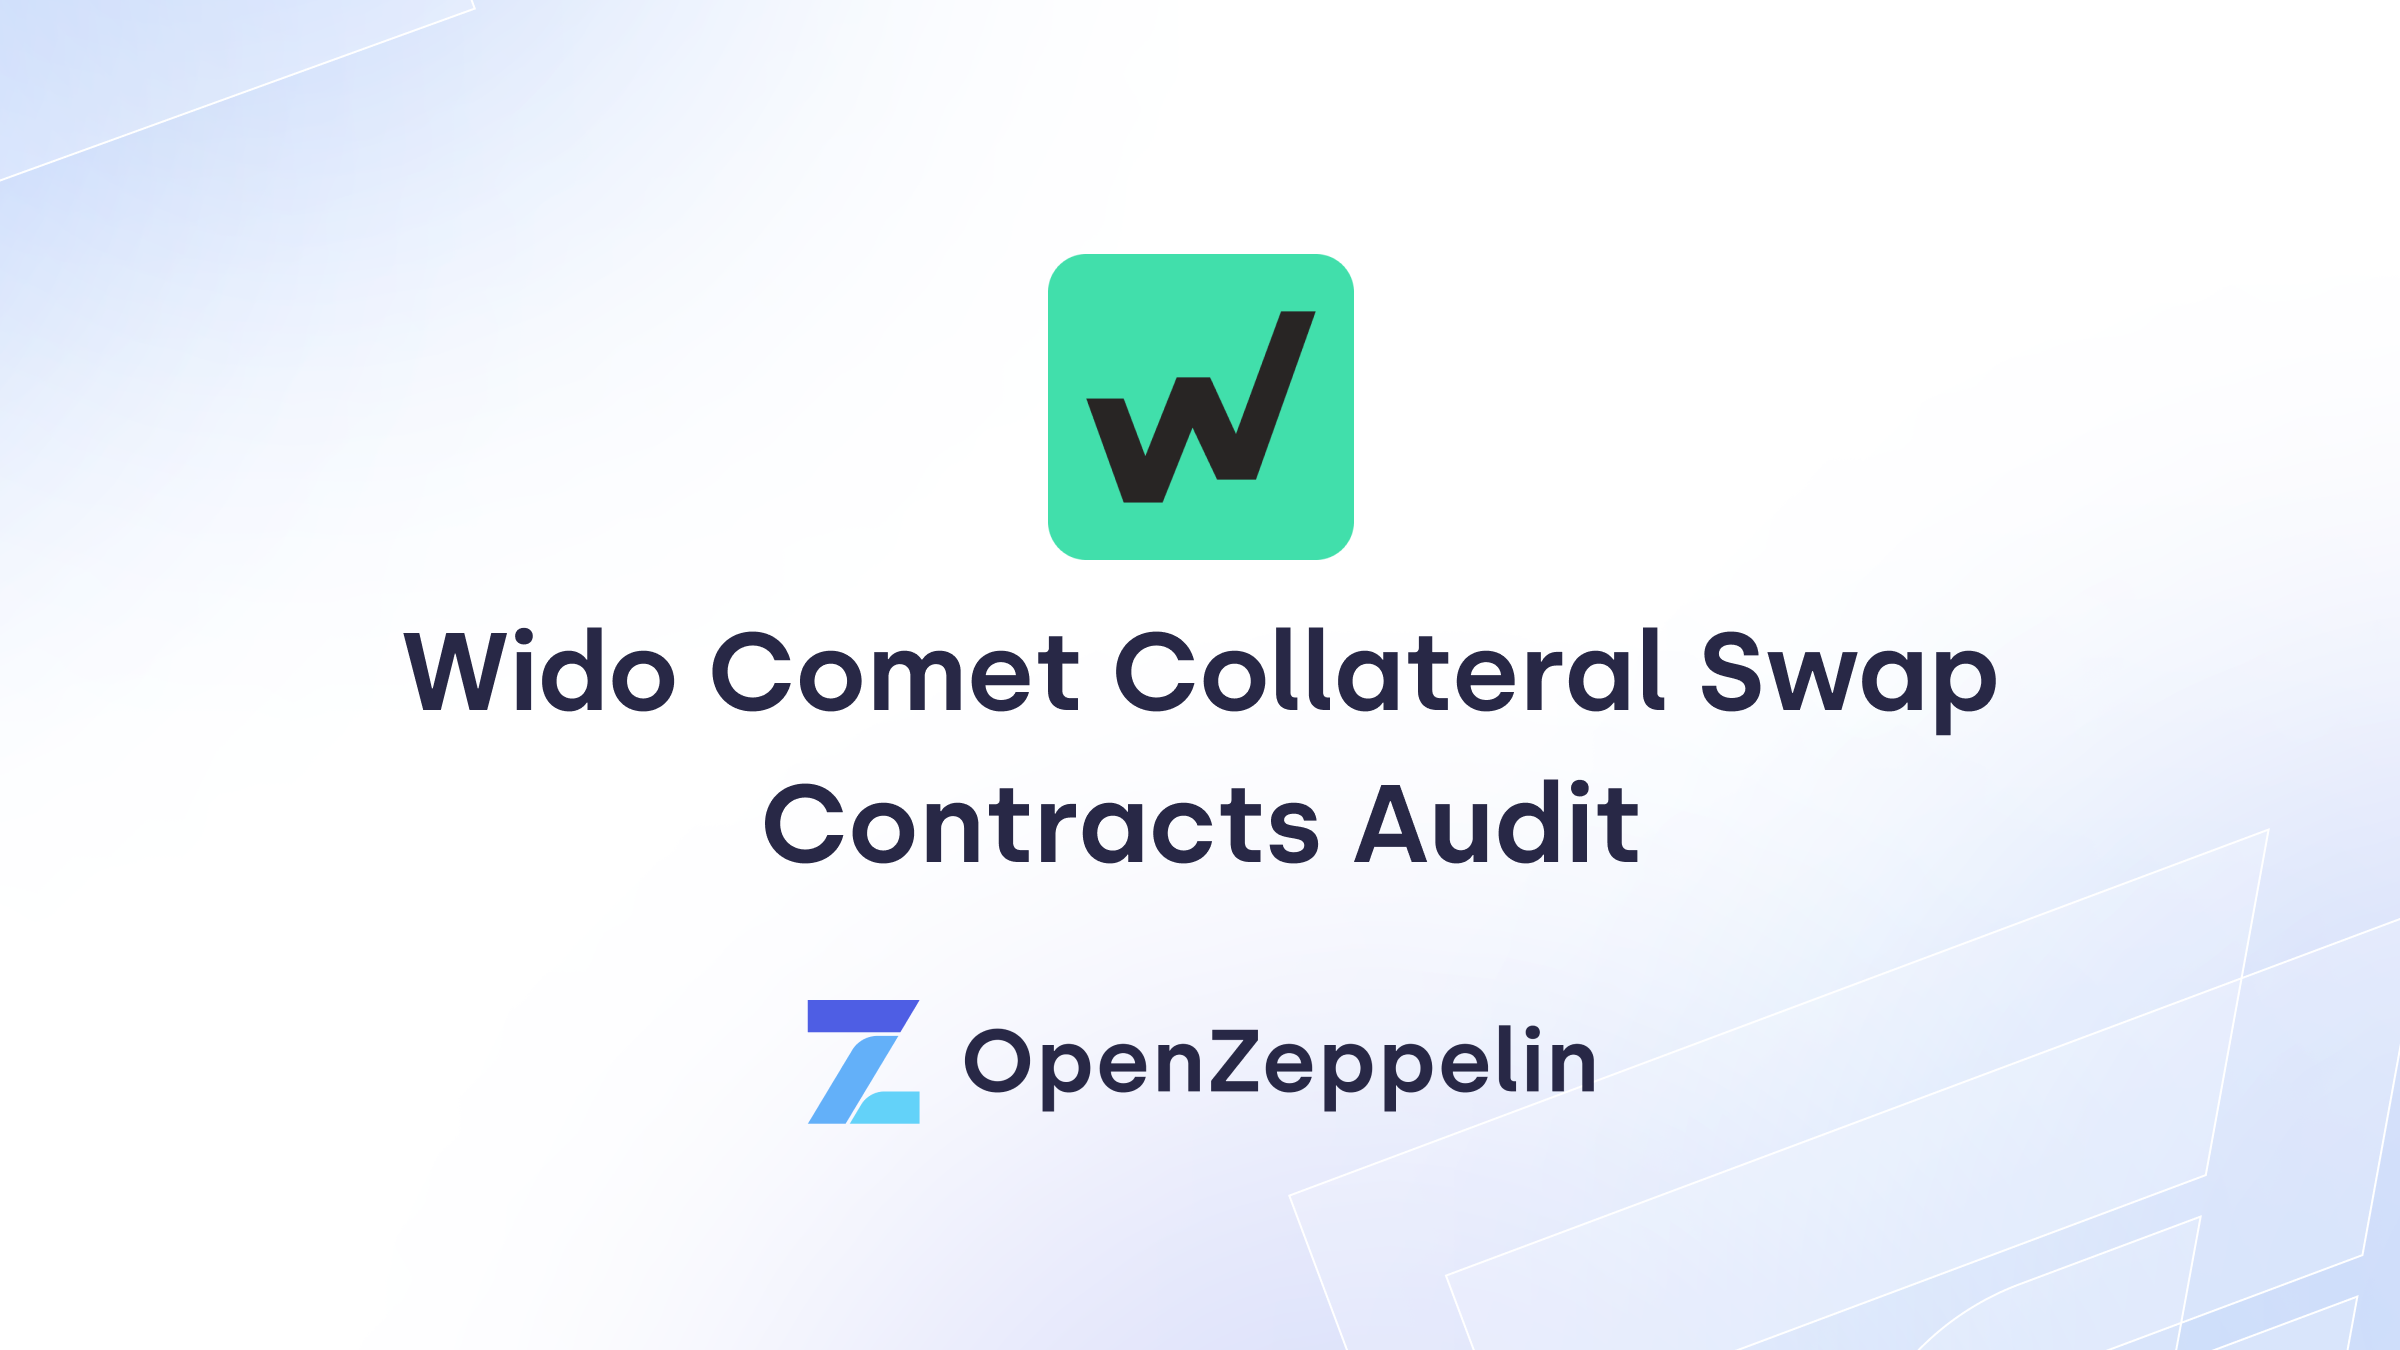 Wido Comet Collateral Swap Contracts Featured Image